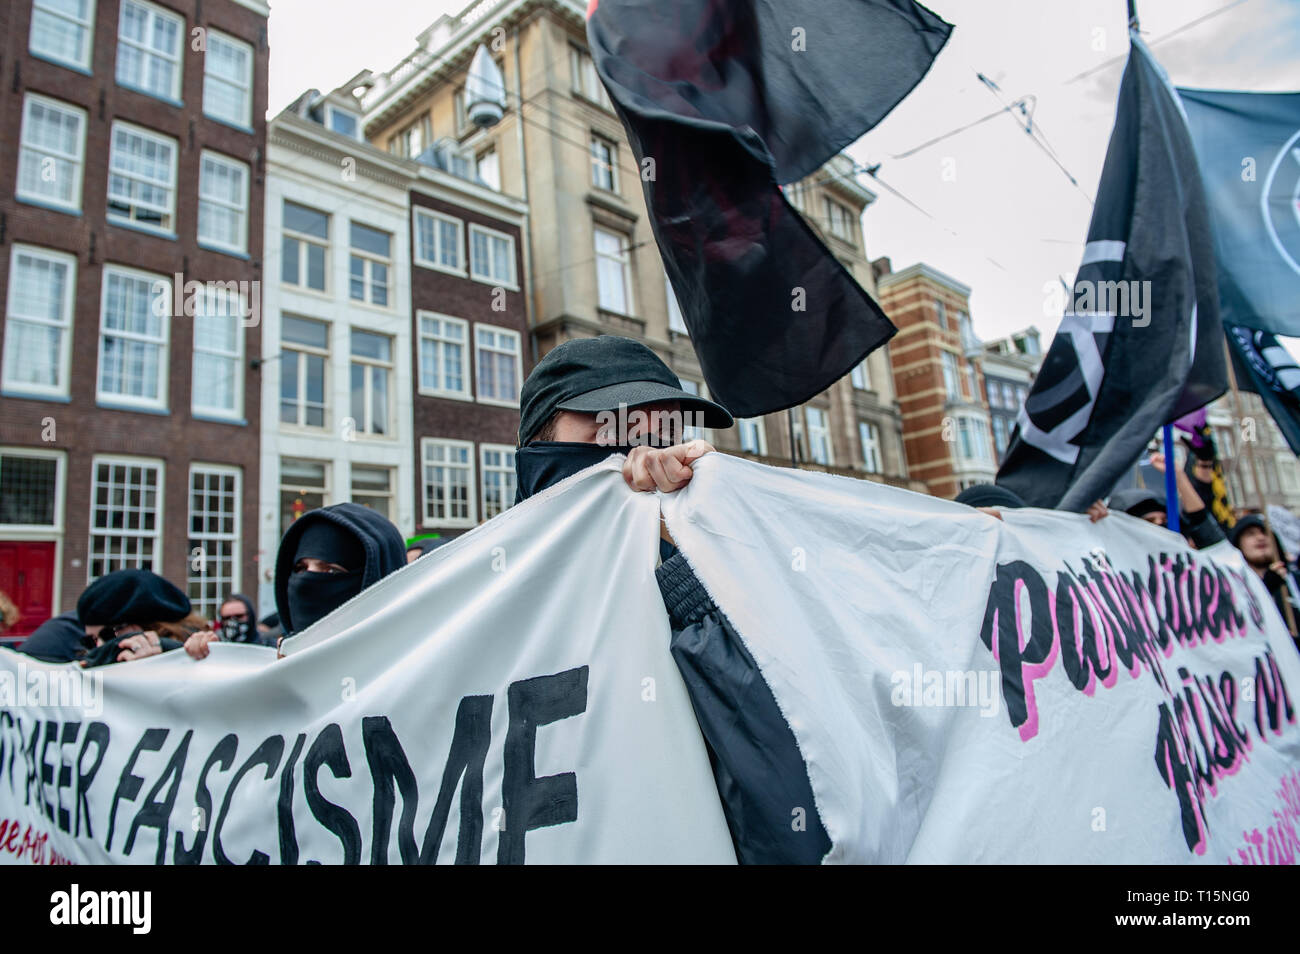 Amsterdam, North Holland, Netherlands. 23rd Mar, 2019. A man is seen  covering his face while holding two Antifa big banners during the  demonstration.Thousands of people gathered at the Dam square in the